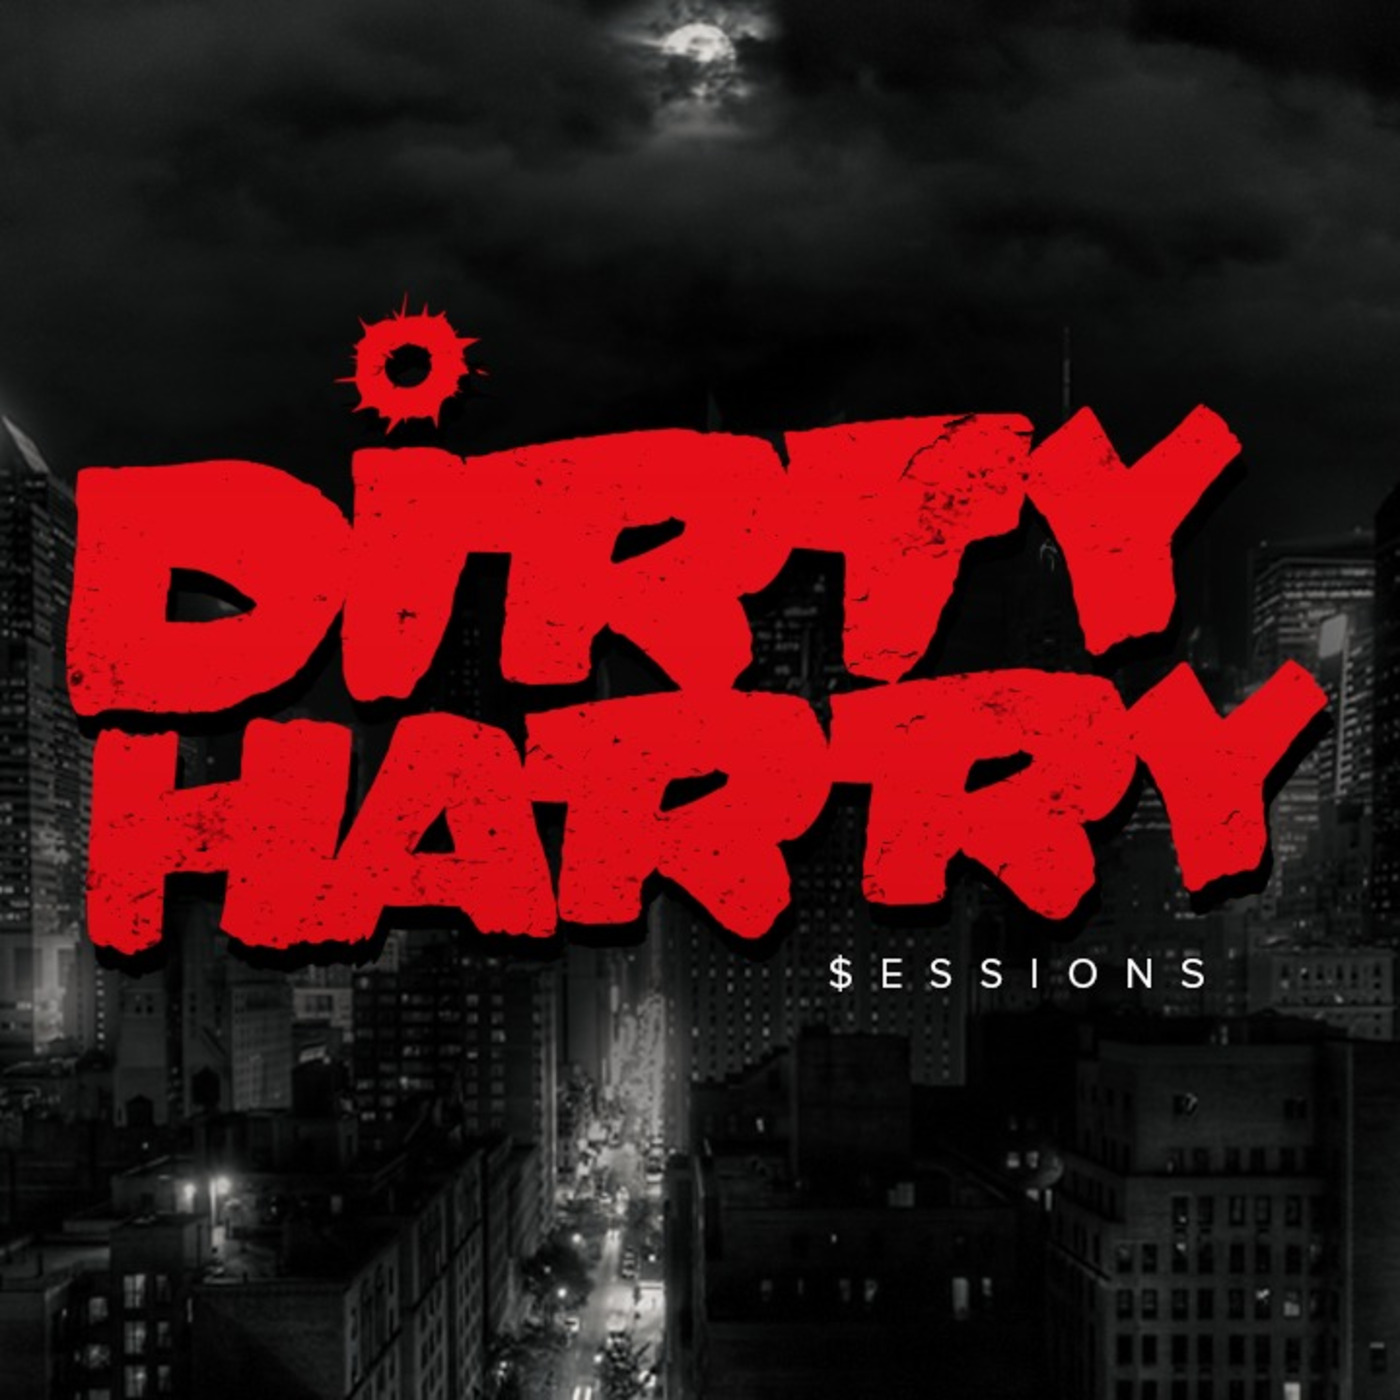 Episode 2: Seismyc ~ The Dirty Harry Sessions volume 2